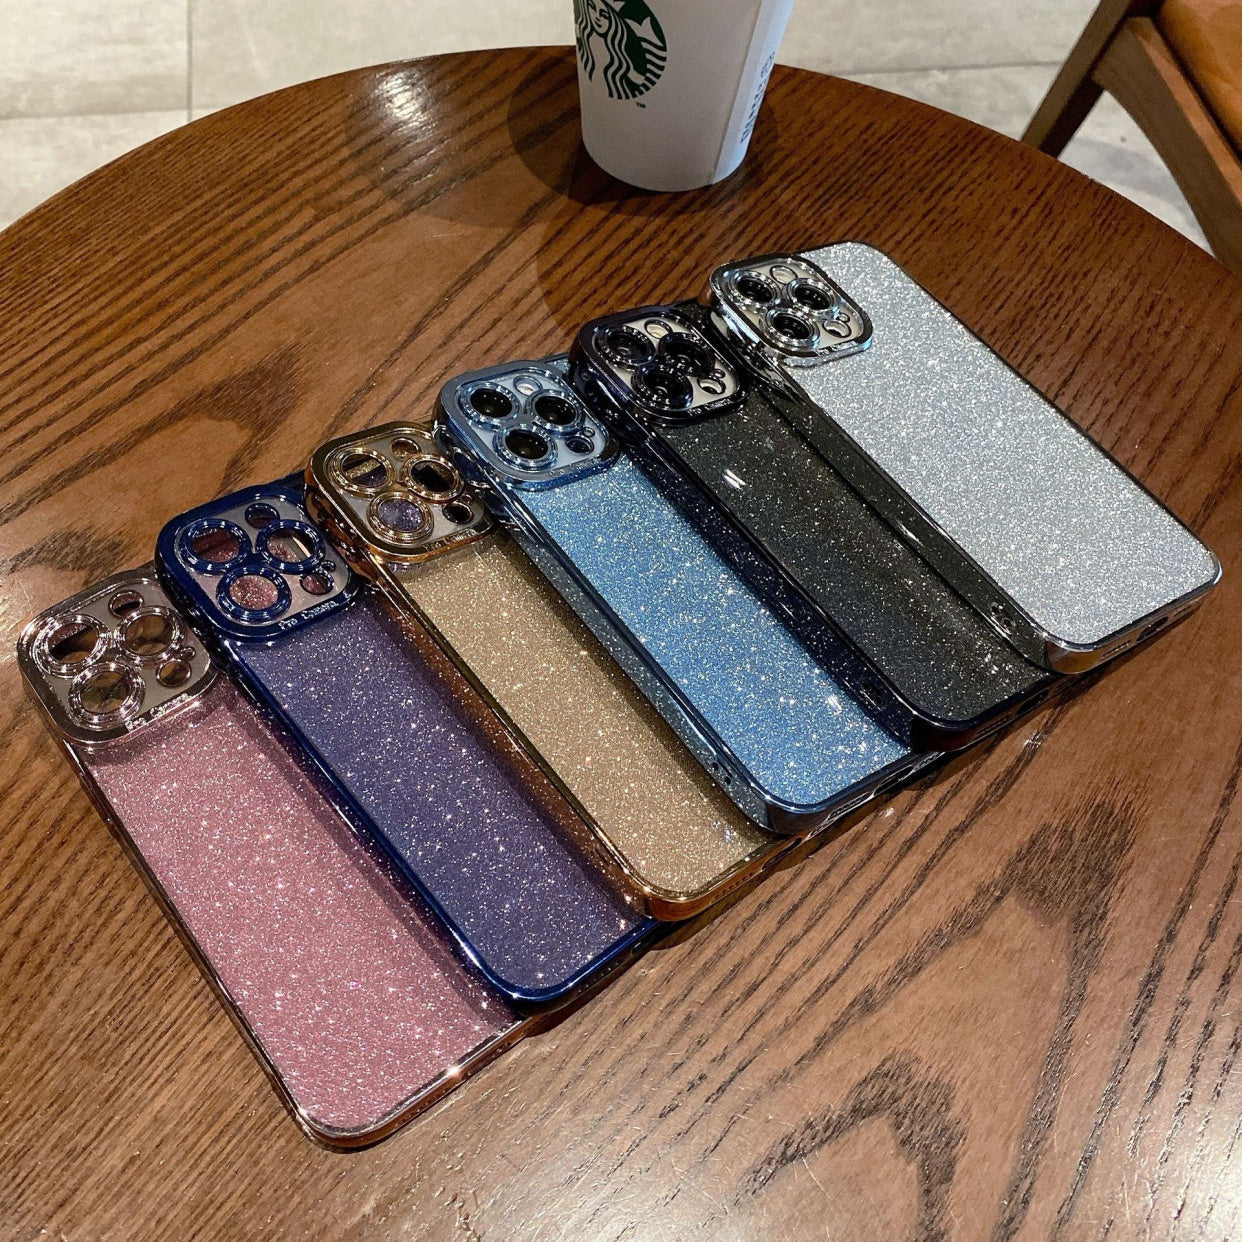 Luxury Square Leather Back Case for iPhone